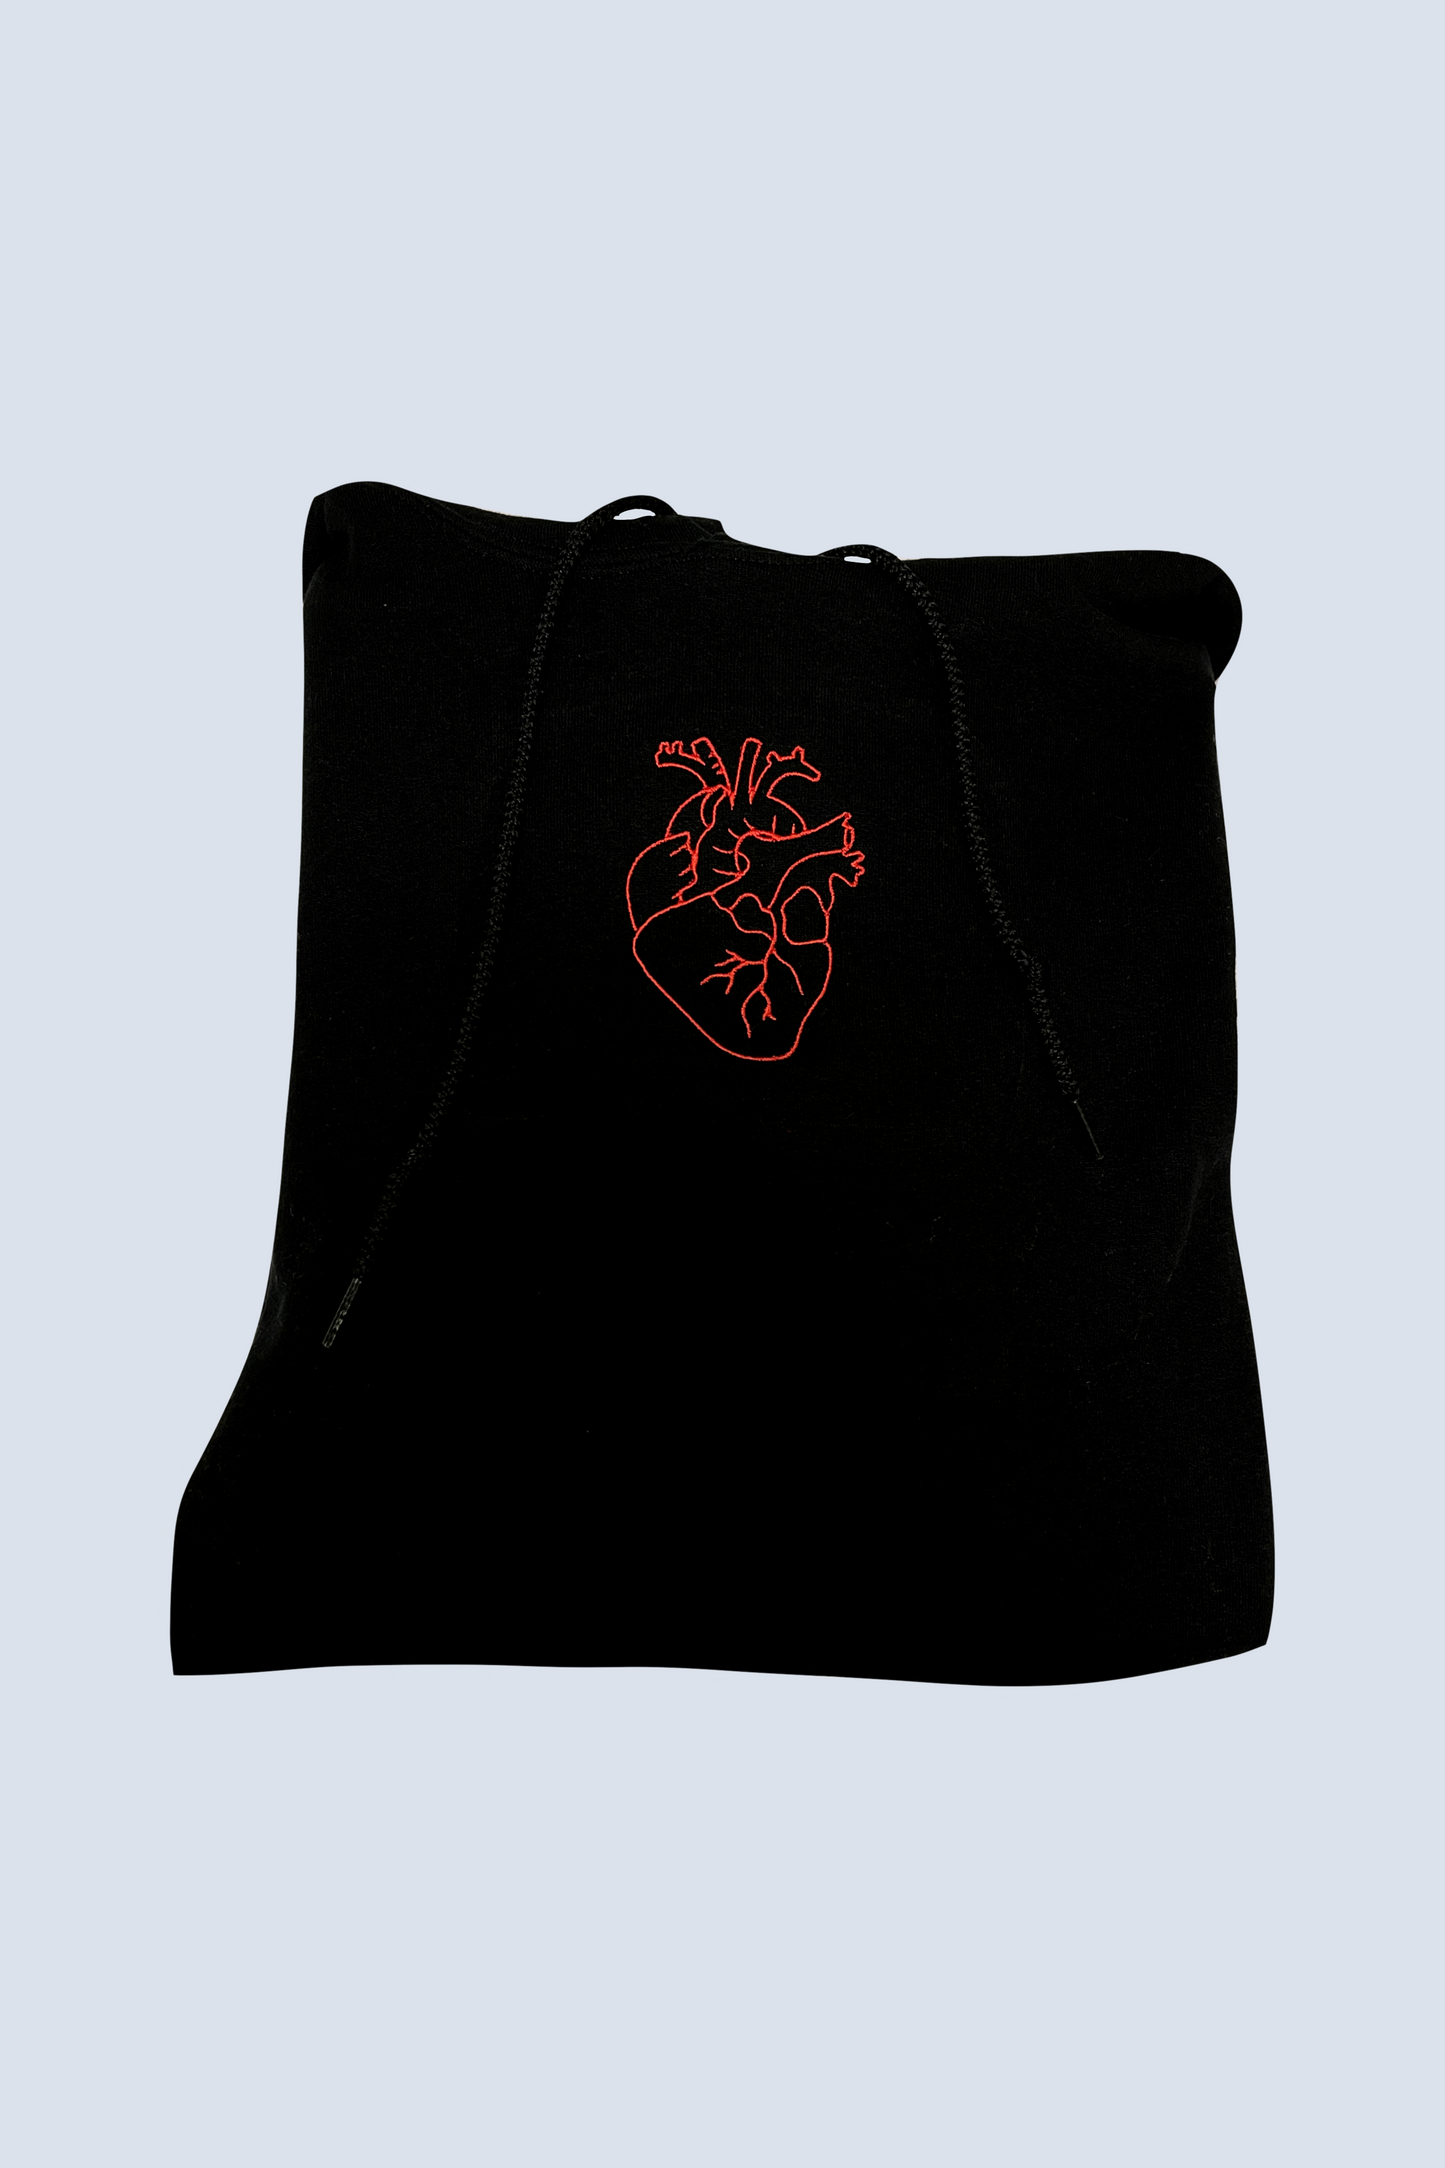 Anatomical Heart Embroidered Matching Set